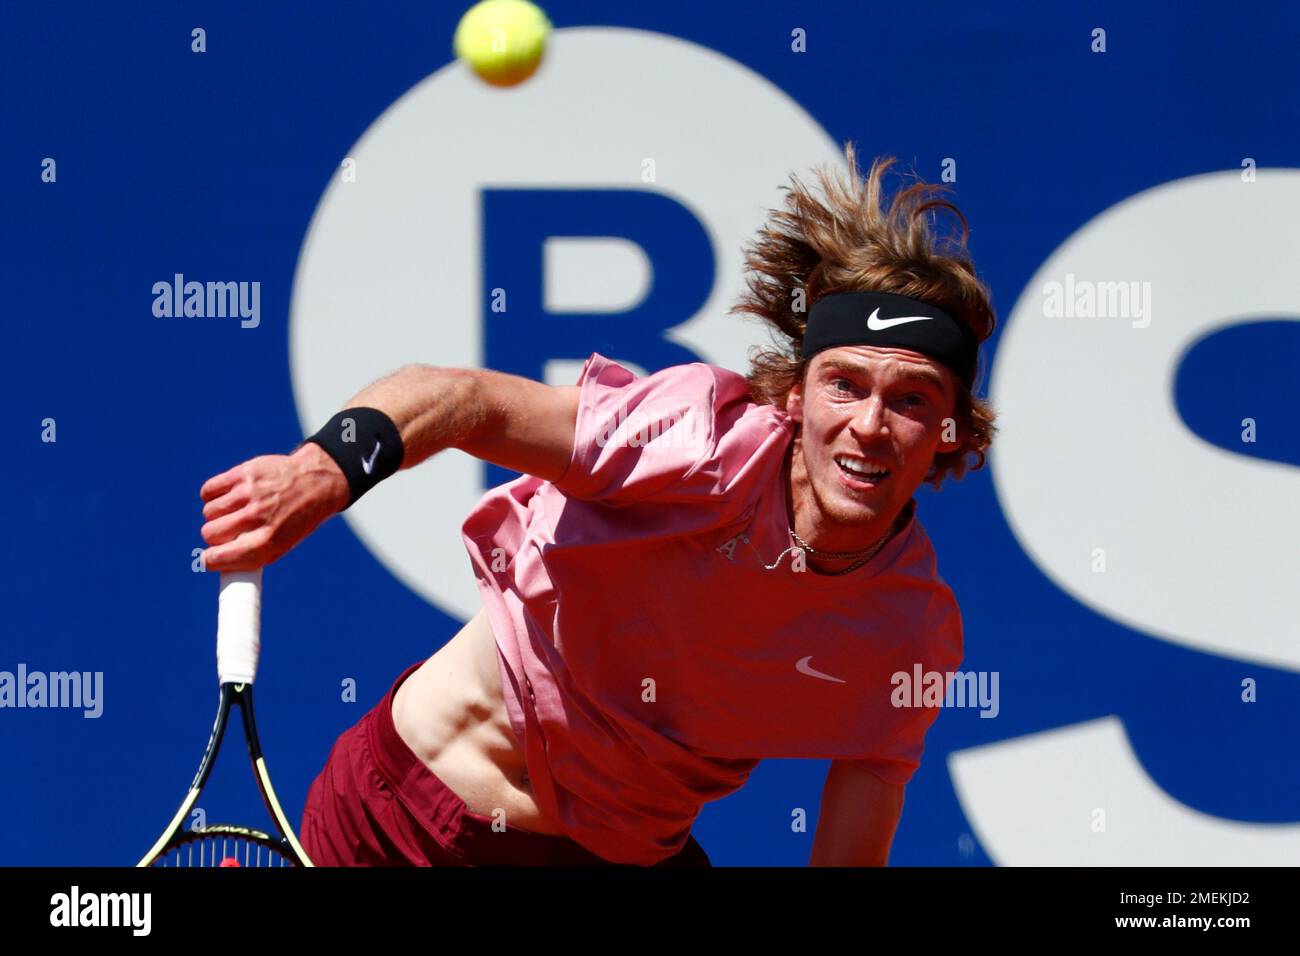 Andrey Rublev of Russia returns the ball to Jannik Sinner of Italy during a quarterfinal Godo tennis tournament in Barcelona, Spain, Friday, April 23, 2021